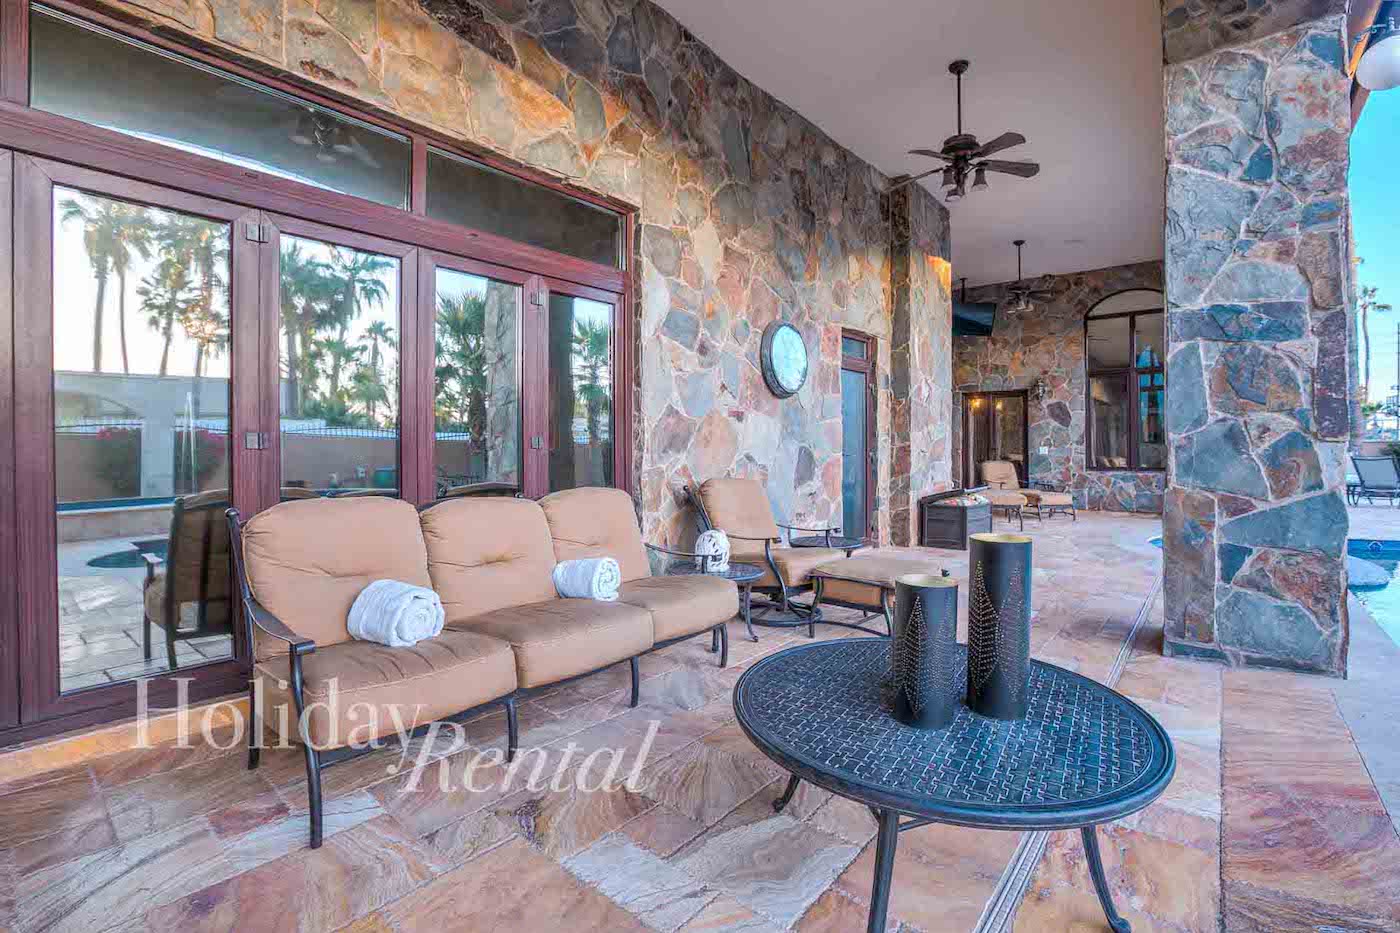 vacation rental patio with plenty of seating areas